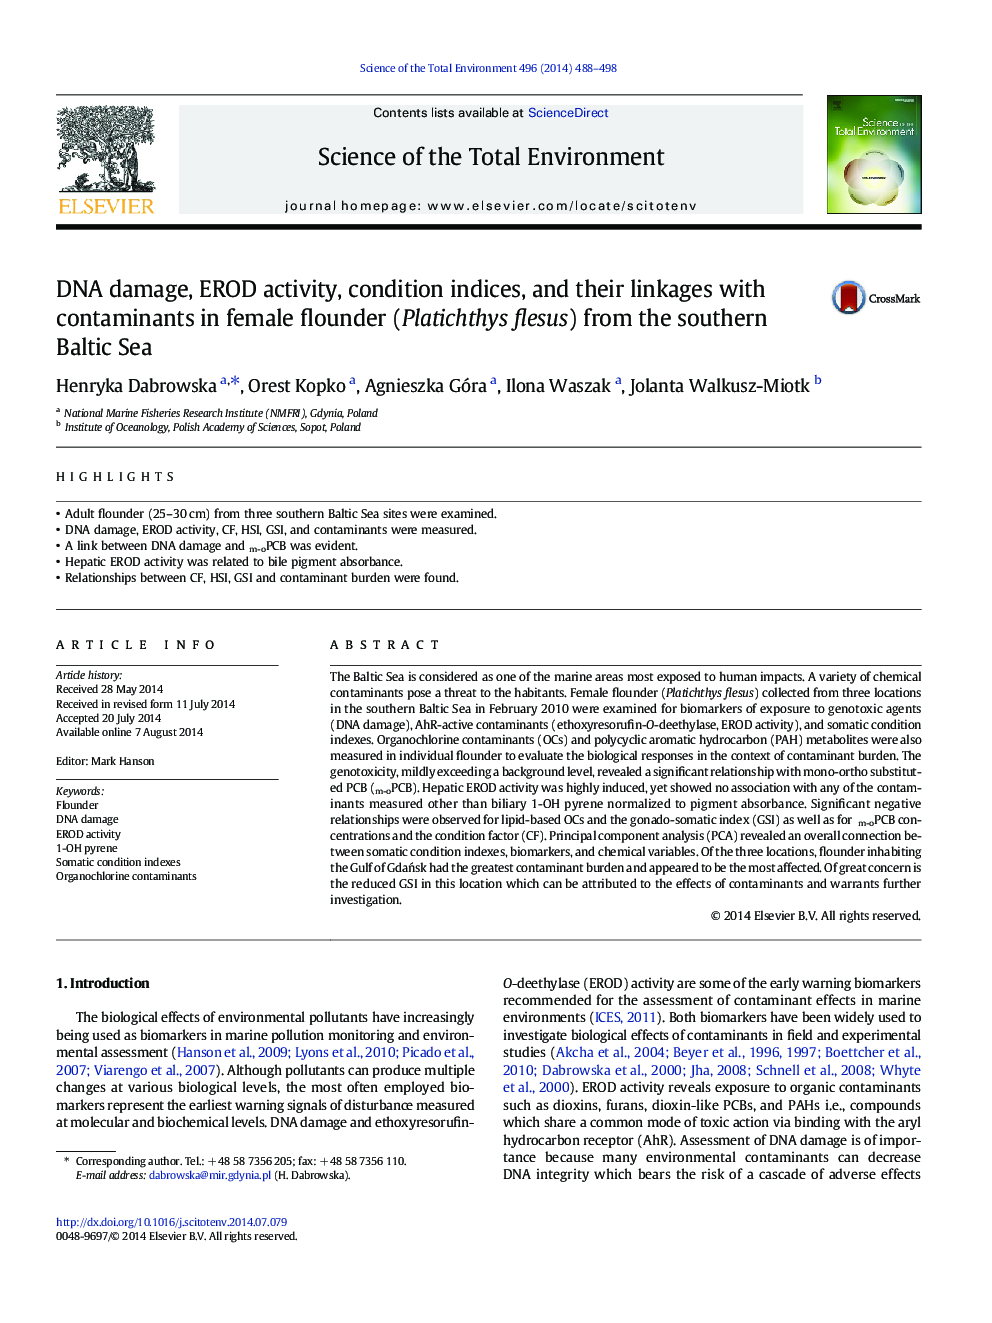 DNA damage, EROD activity, condition indices, and their linkages with contaminants in female flounder (Platichthys flesus) from the southern Baltic Sea